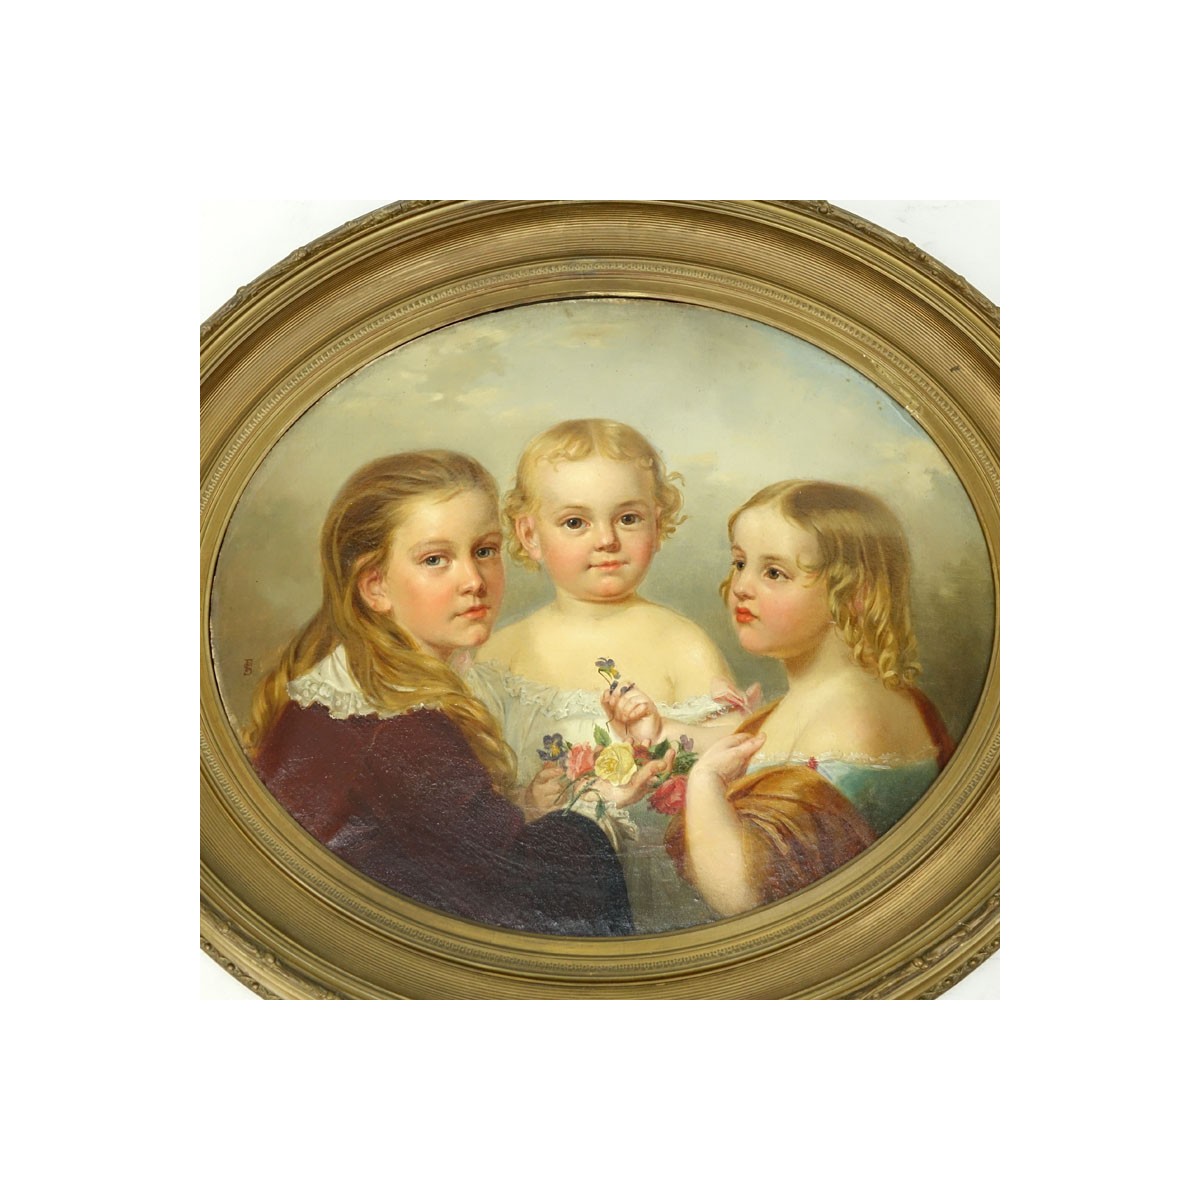 Fridolin Schlegel, American (mid-19th century) Oil on Canvas "Three Sisters". Initialed lower left, signed and dated 1859 en verso.